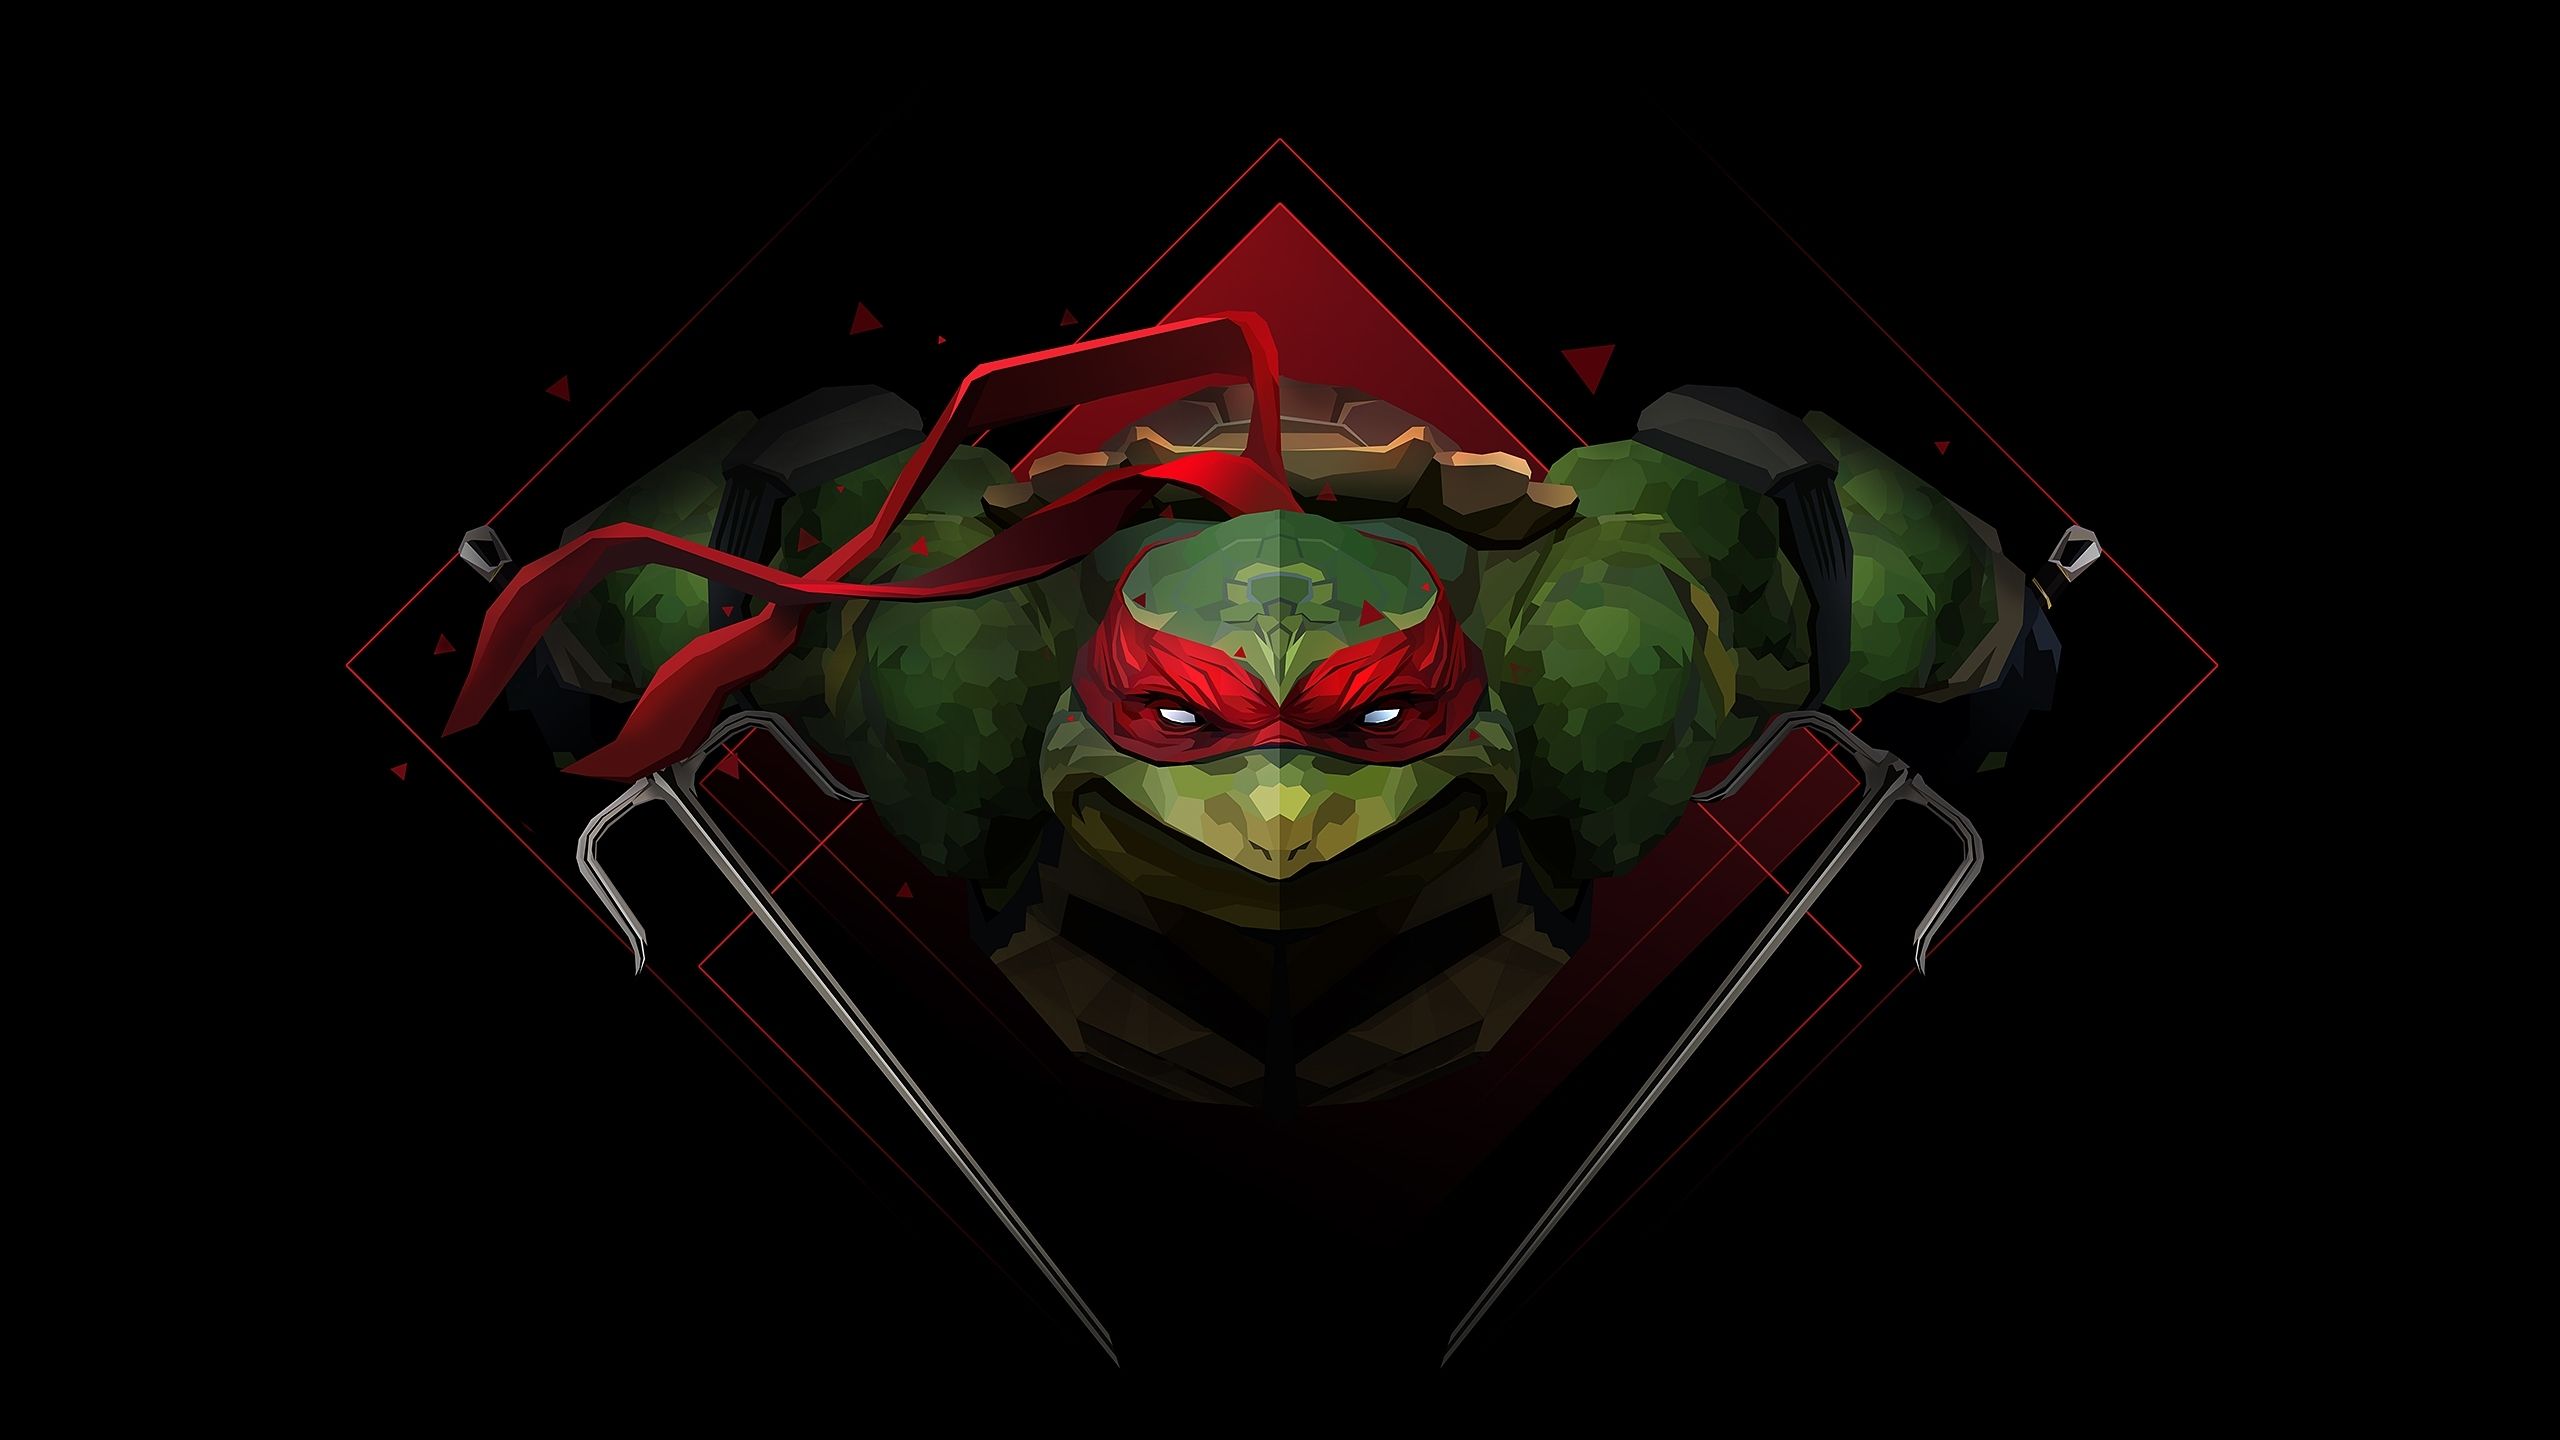 Raphael 4K wallpaper for your desktop or mobile screen free and easy to download